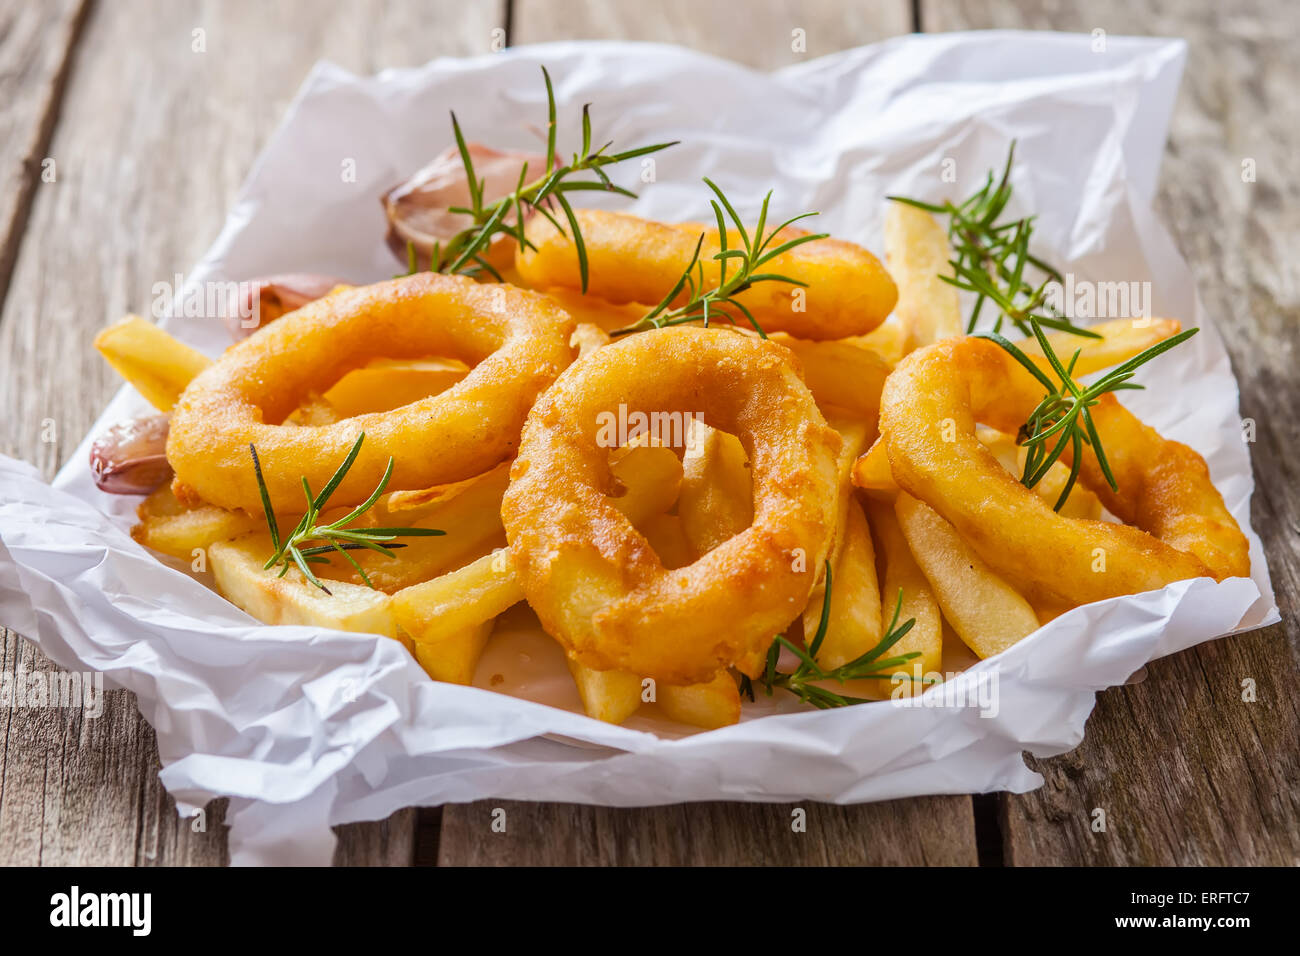 french fries with calamari and rosemary on white paper Stock Photo